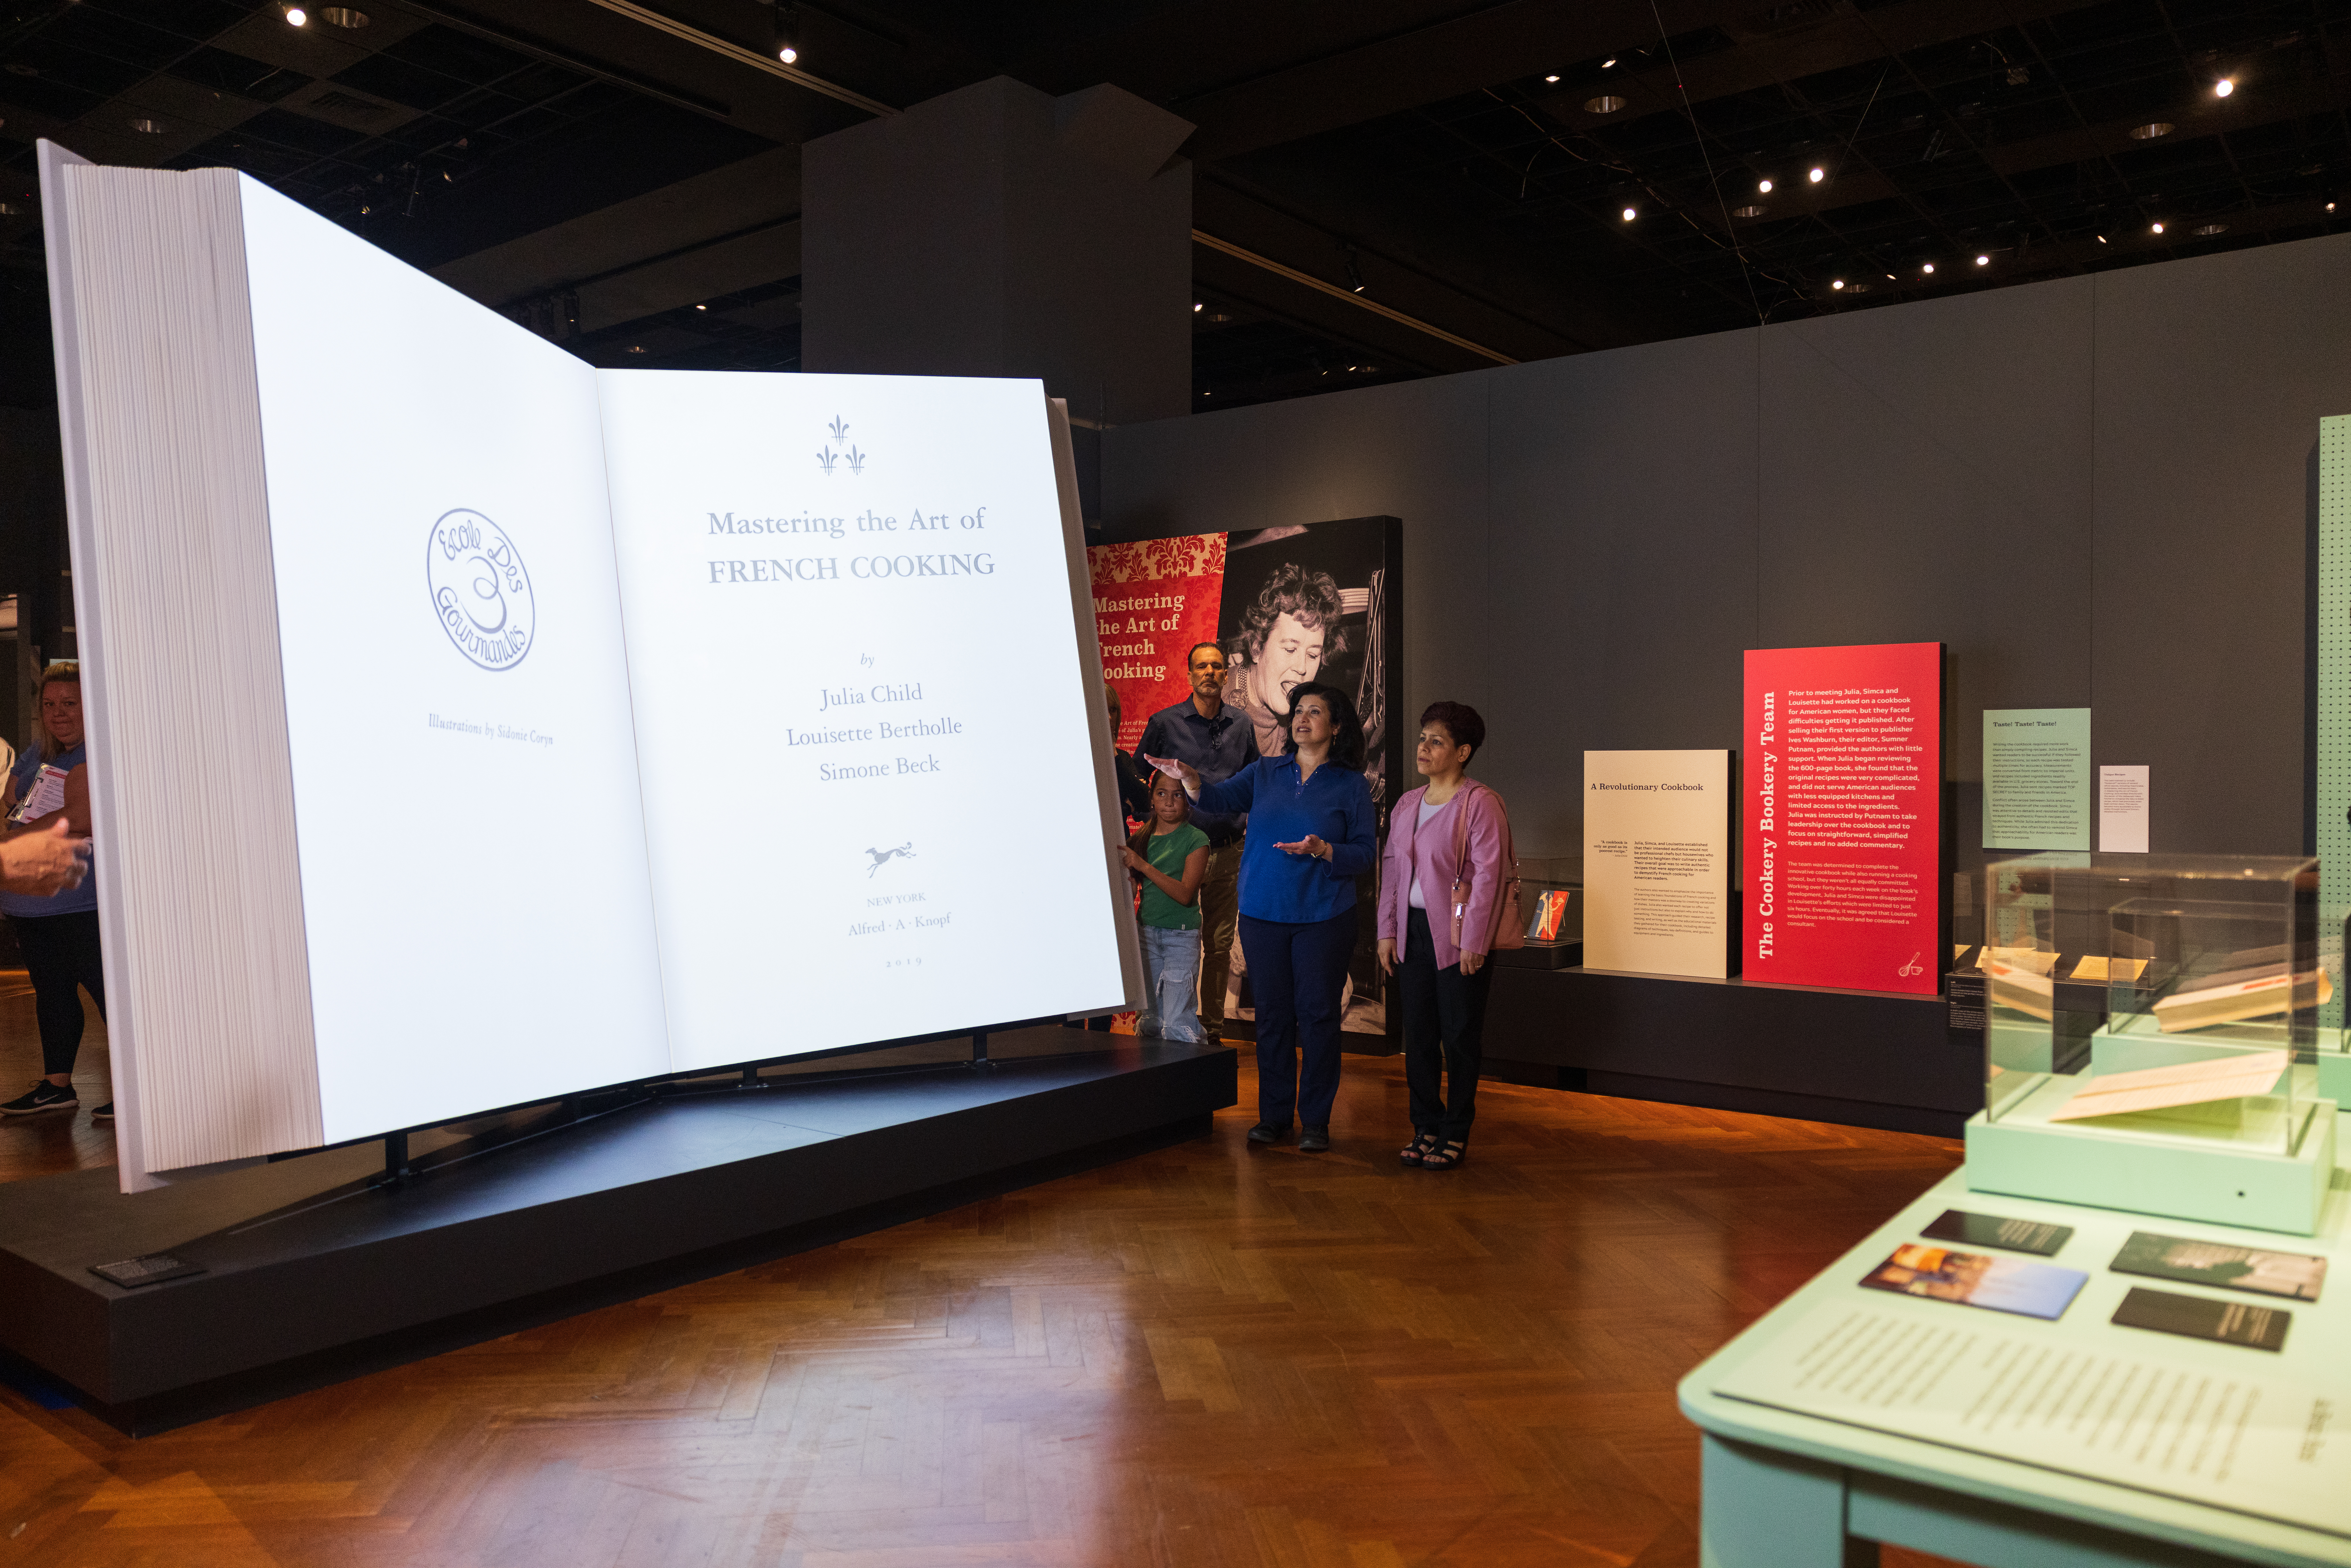 Gallery in Julia Child exhibit showing life size cookbook with people looking on